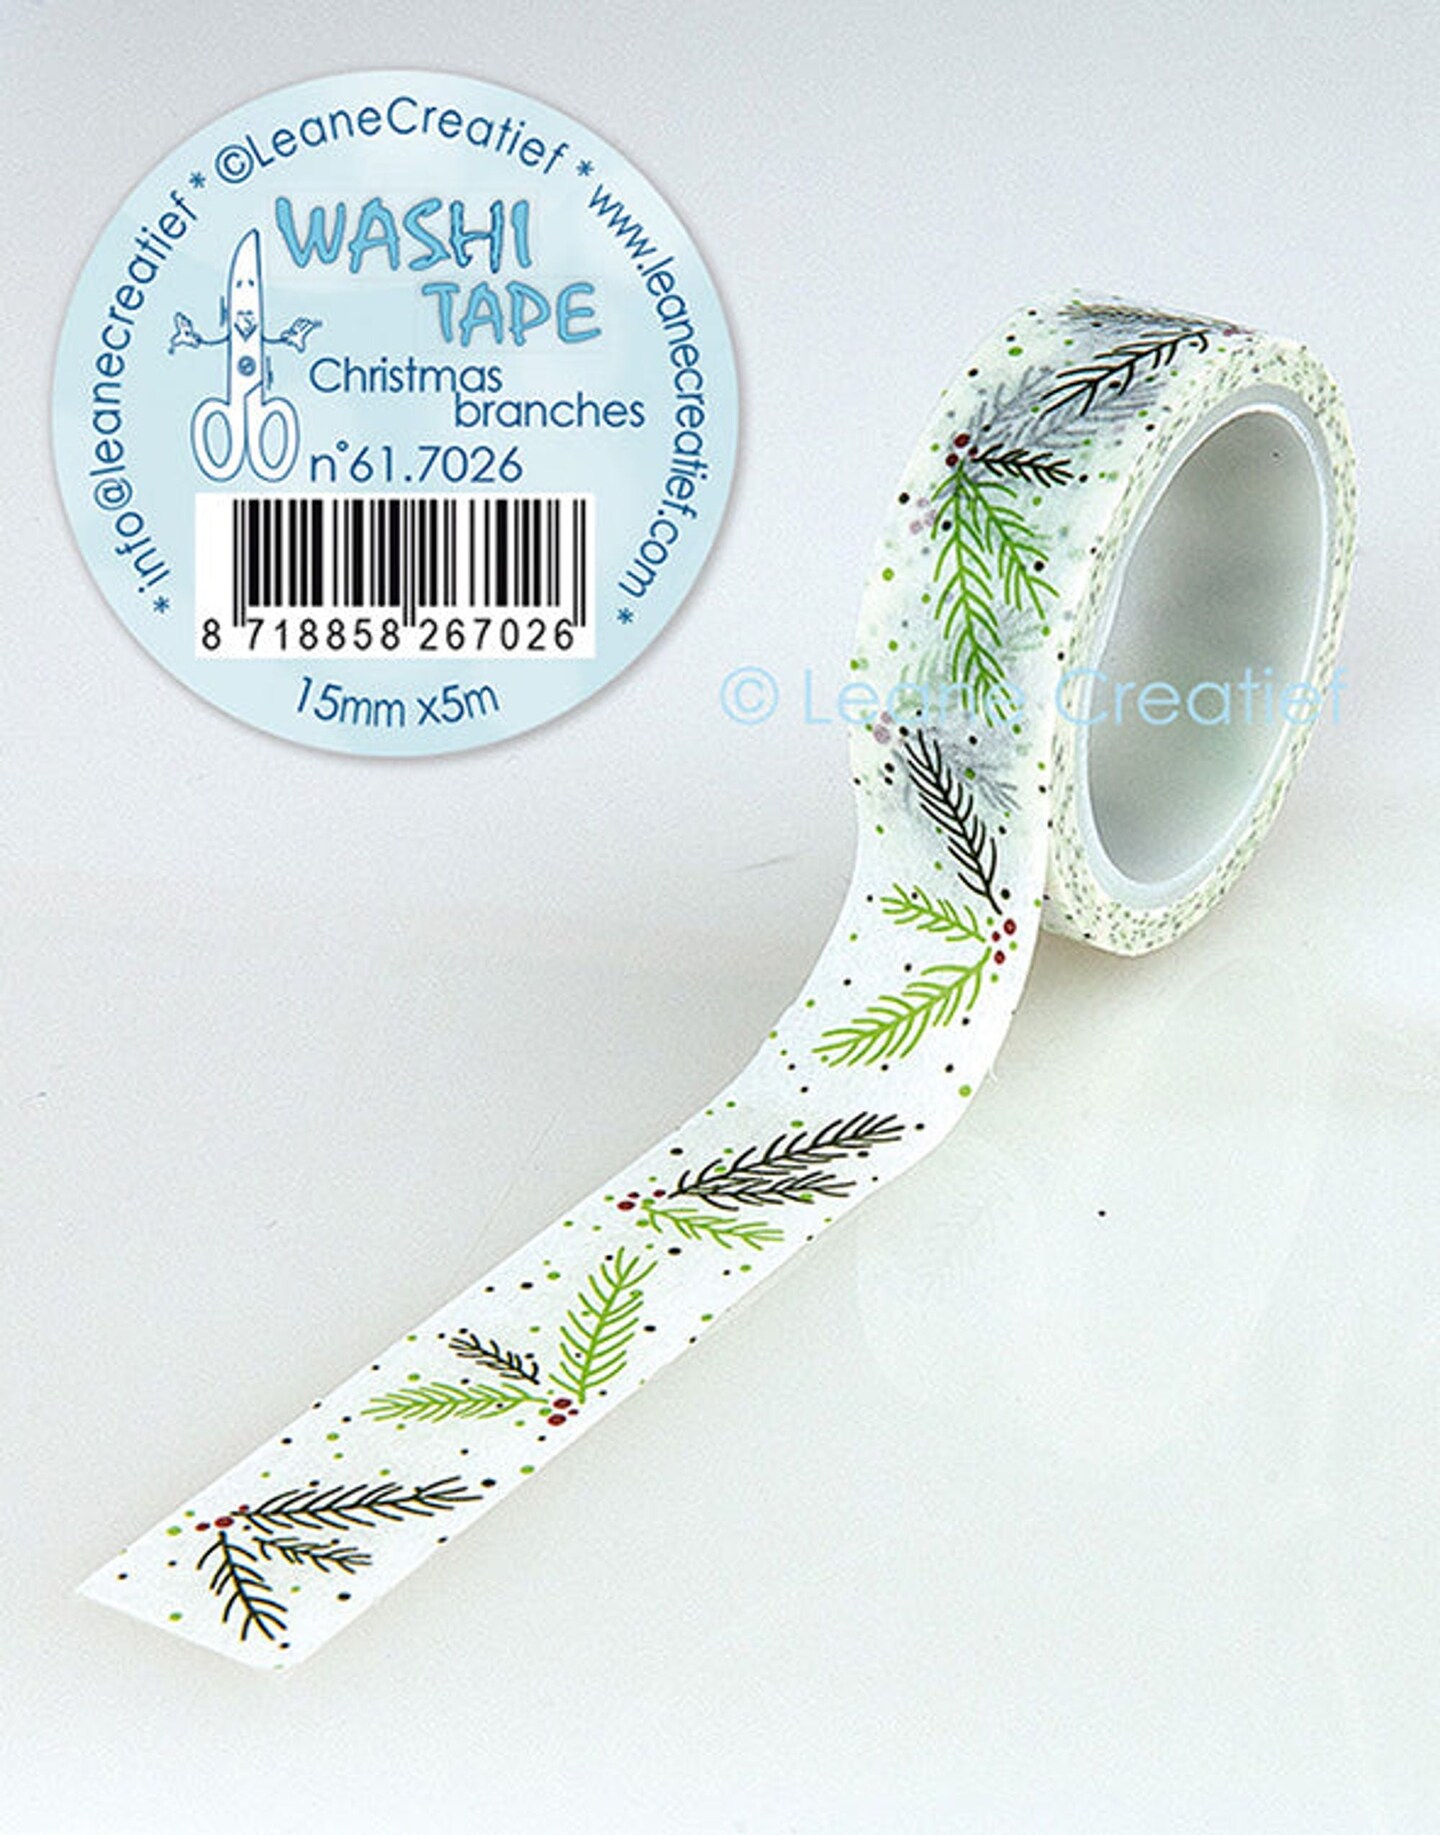 Leane Creatief Washi Tape Christmas Branches, 15mm X 5m